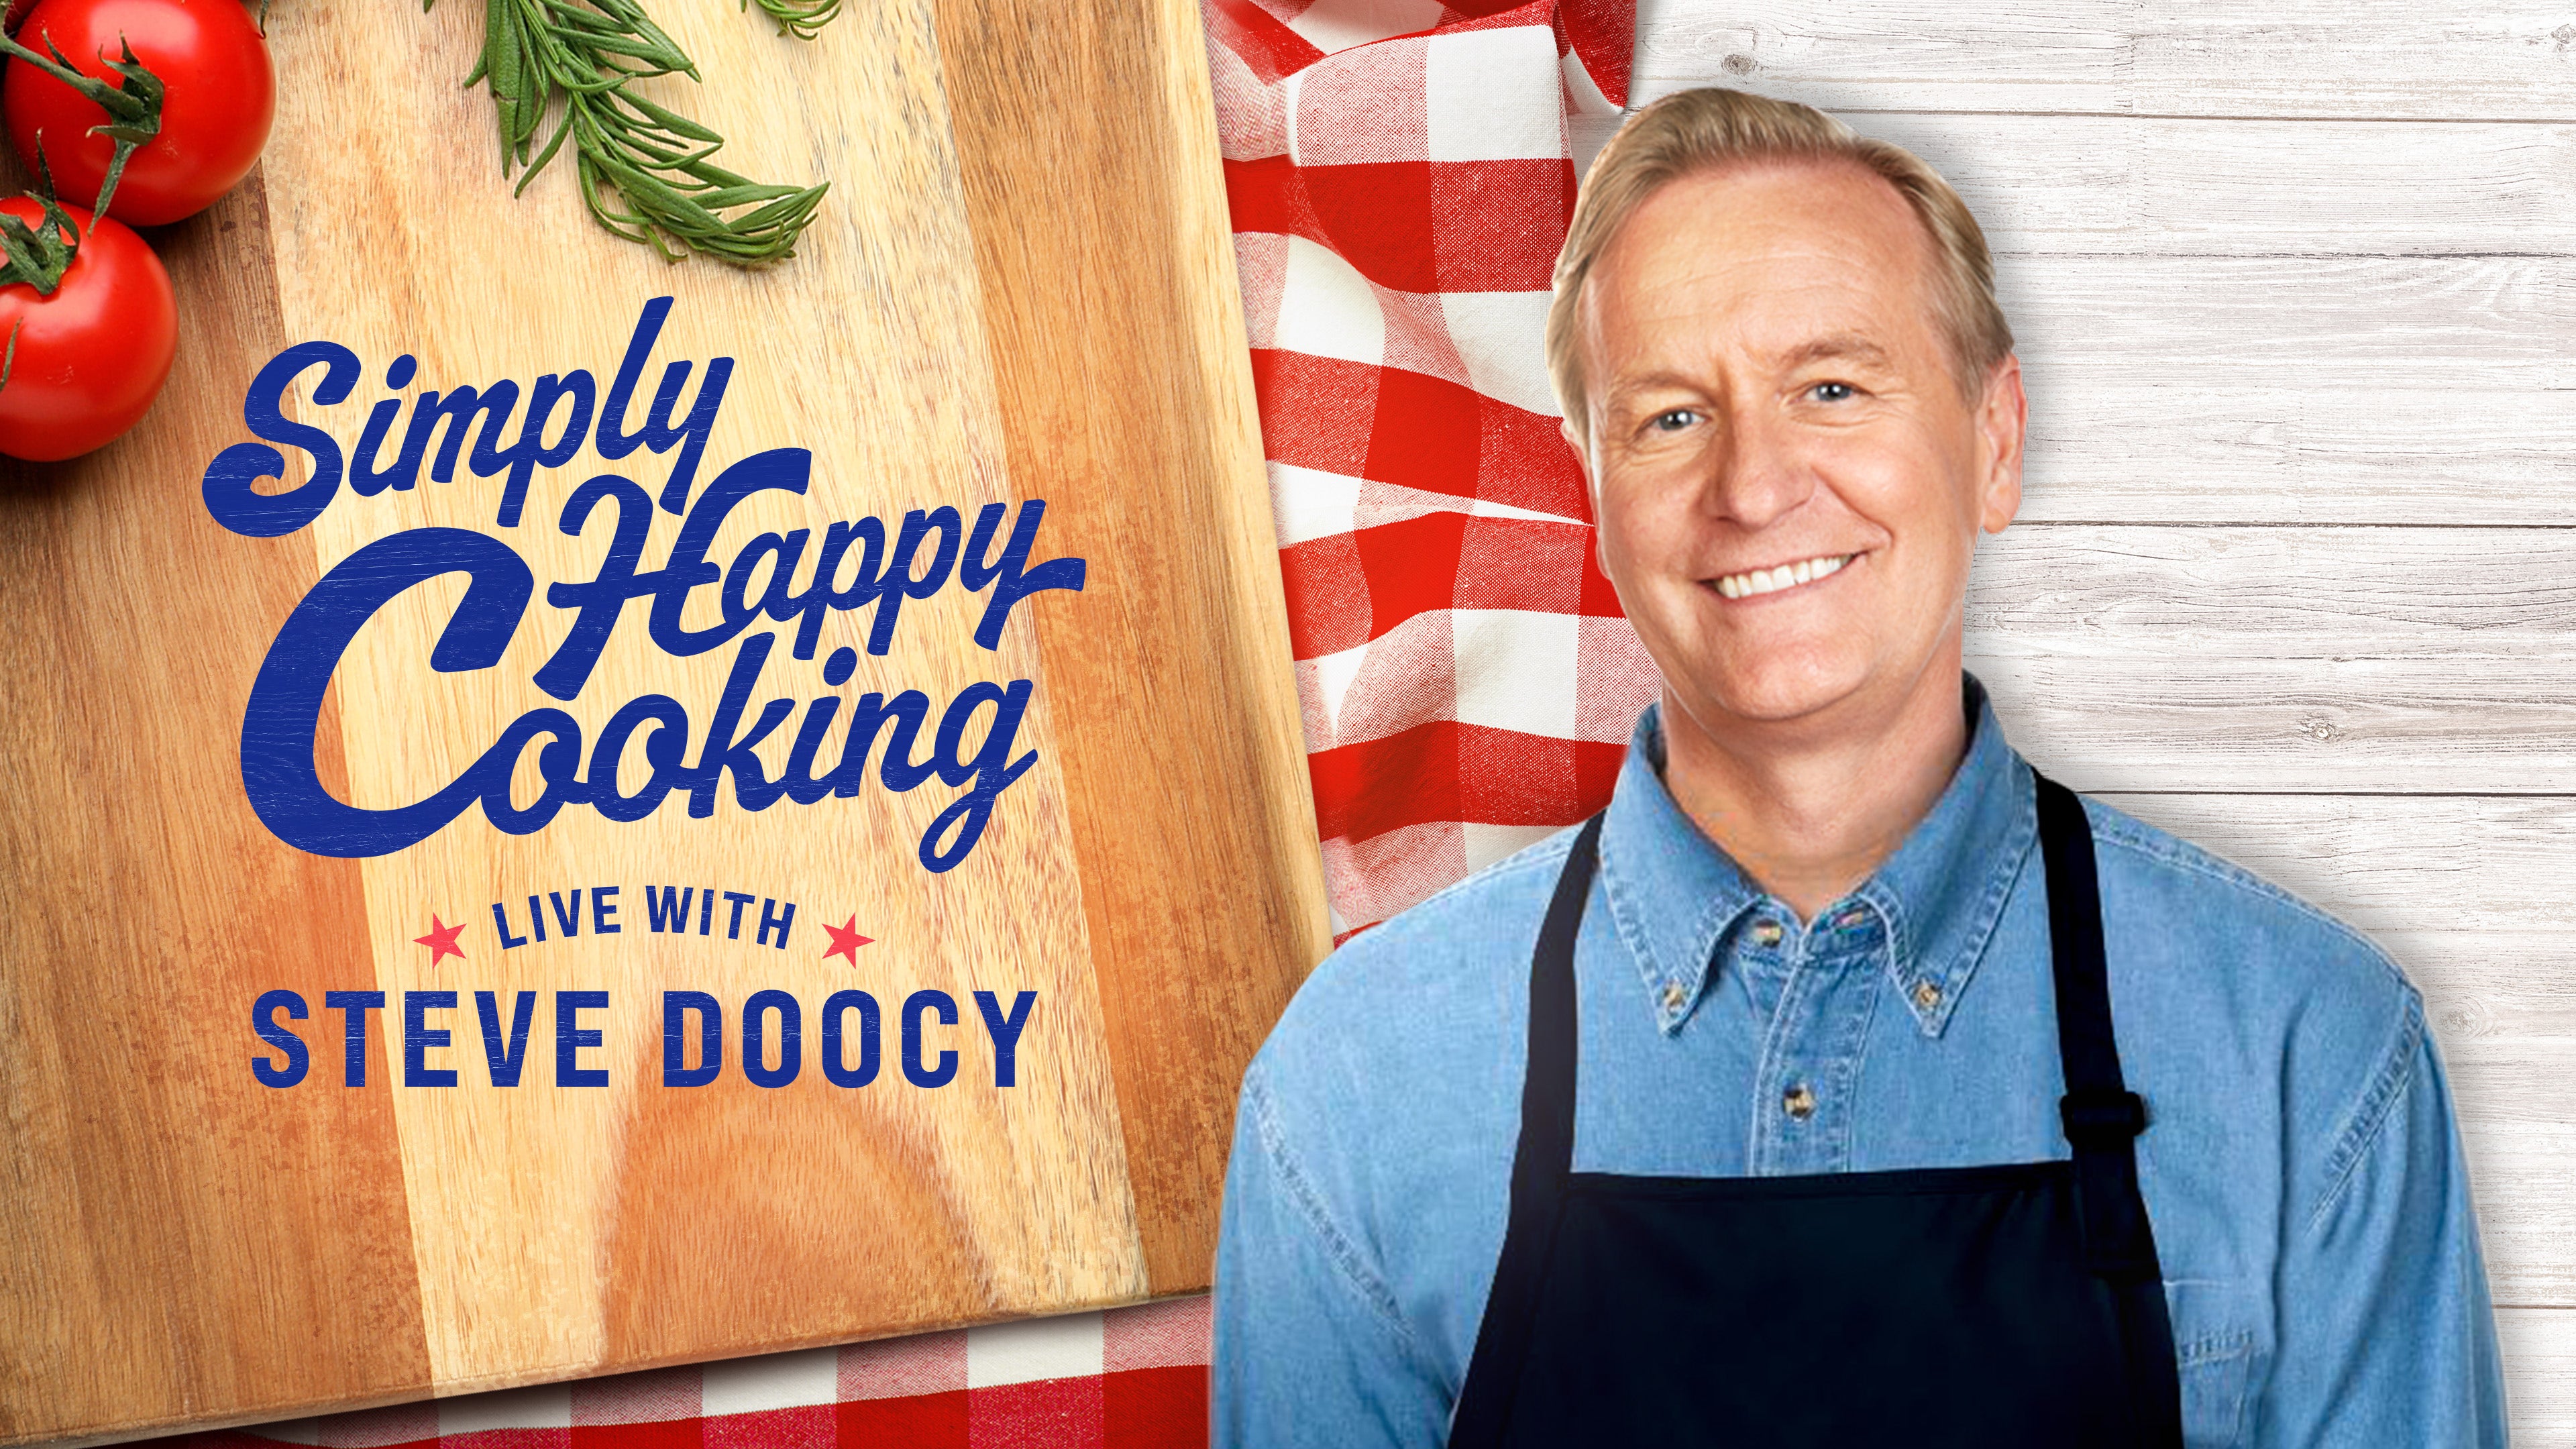 Steve Doocy is cooking up something all fans will enjoy with new recipes, Fox Nation interactive event